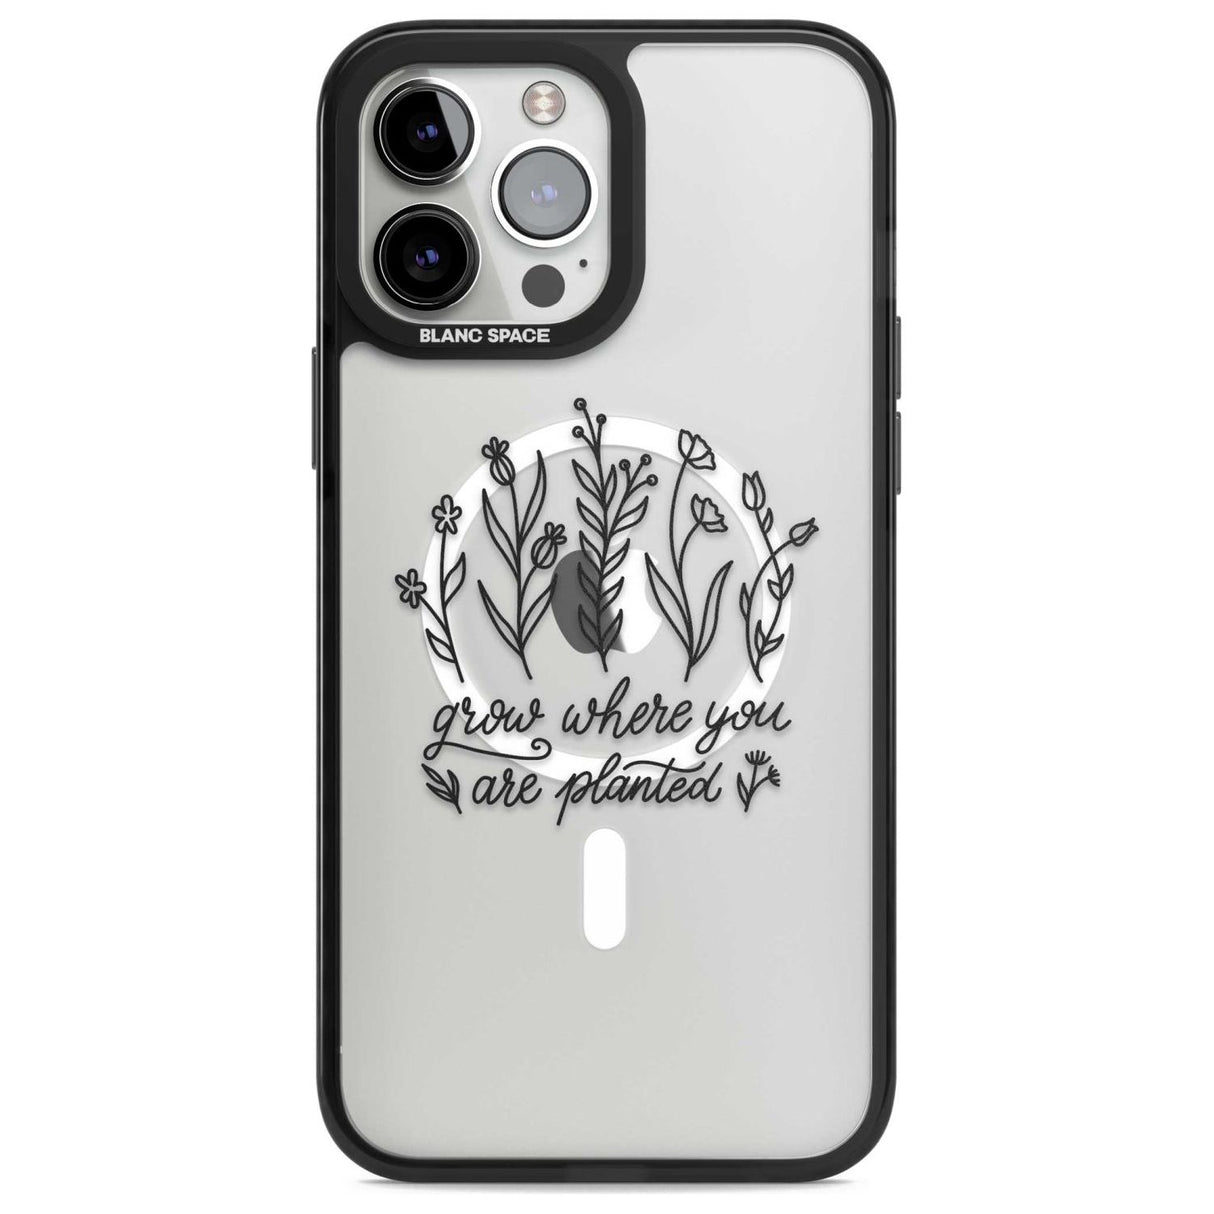 Grow where you are planted Phone Case iPhone 13 Pro Max / Magsafe Black Impact Case Blanc Space